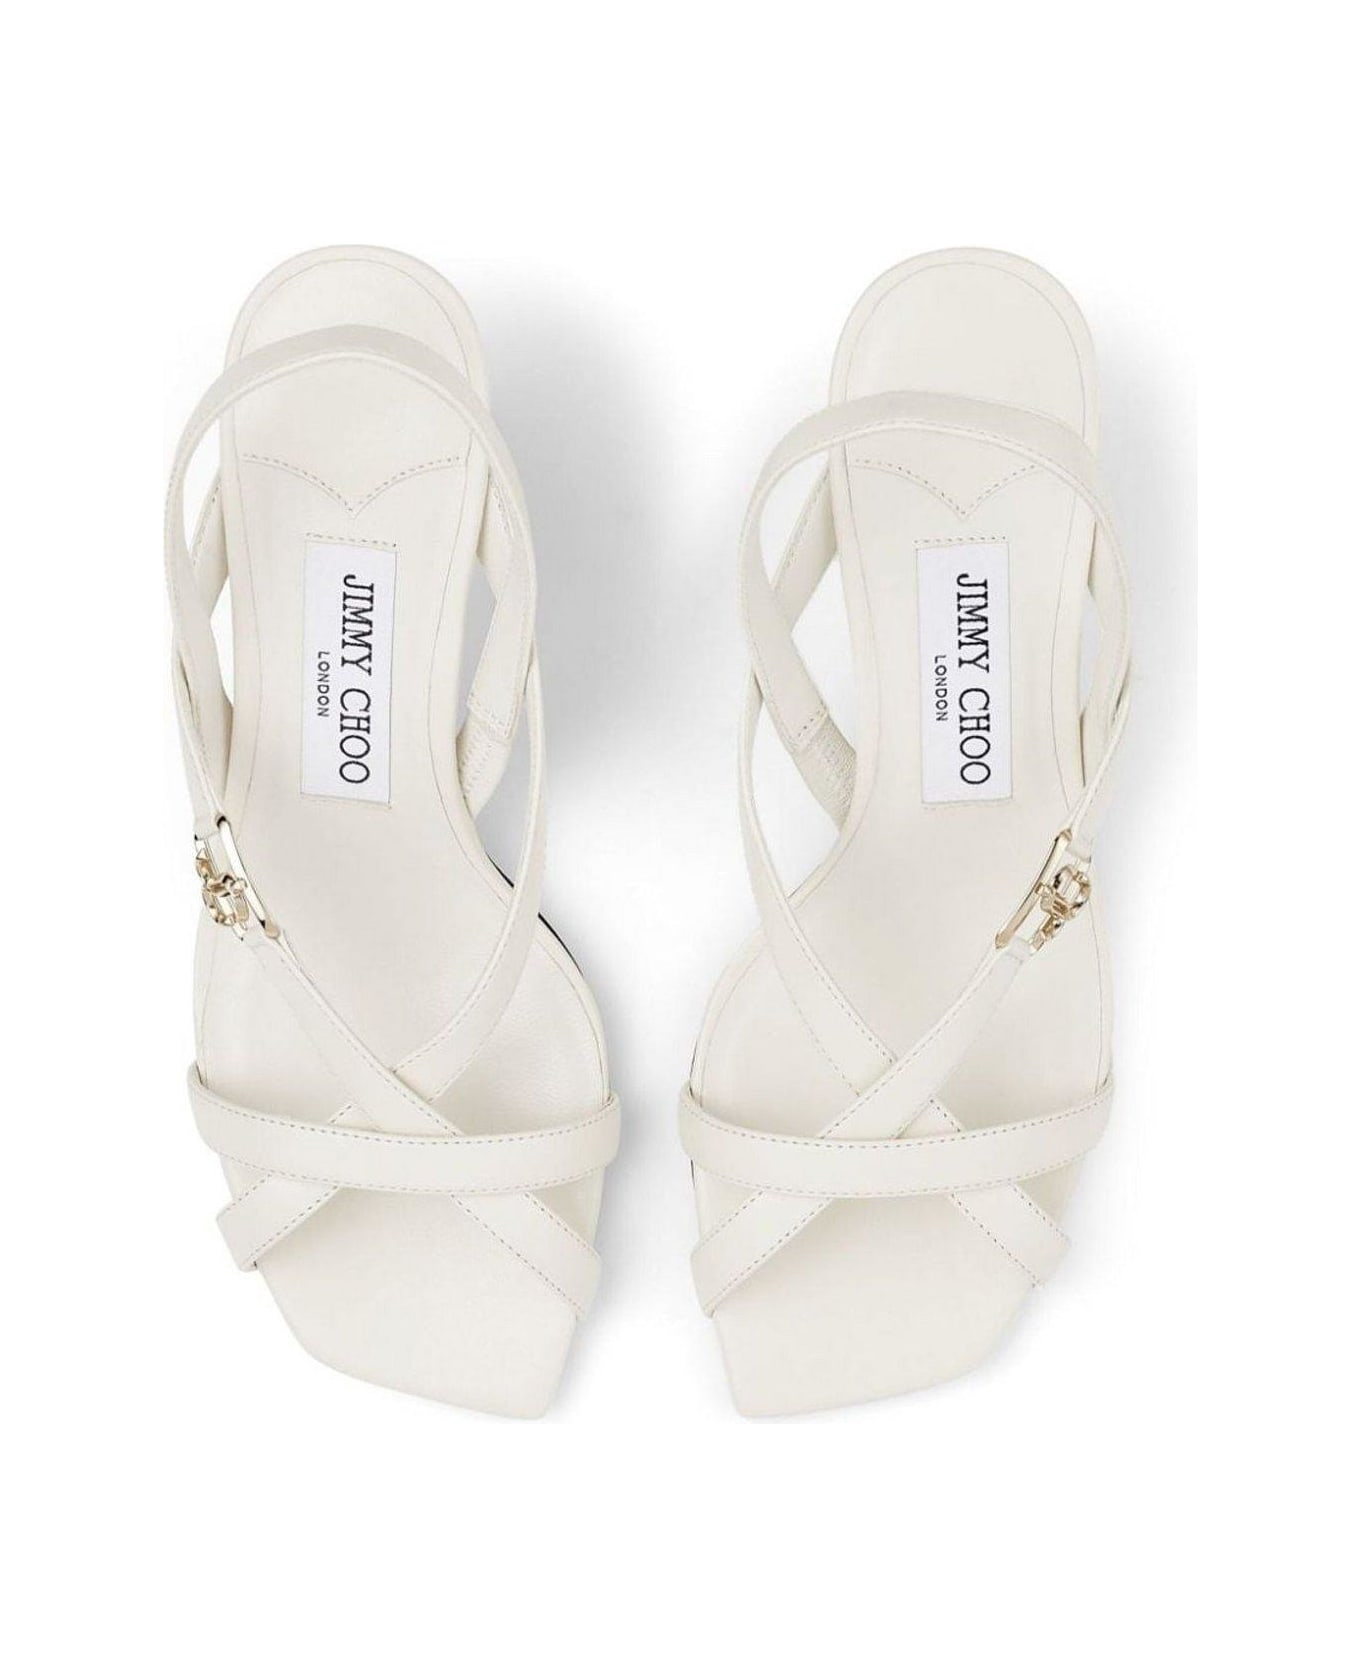 Jimmy Choo Strapped Heeled Sandals - White